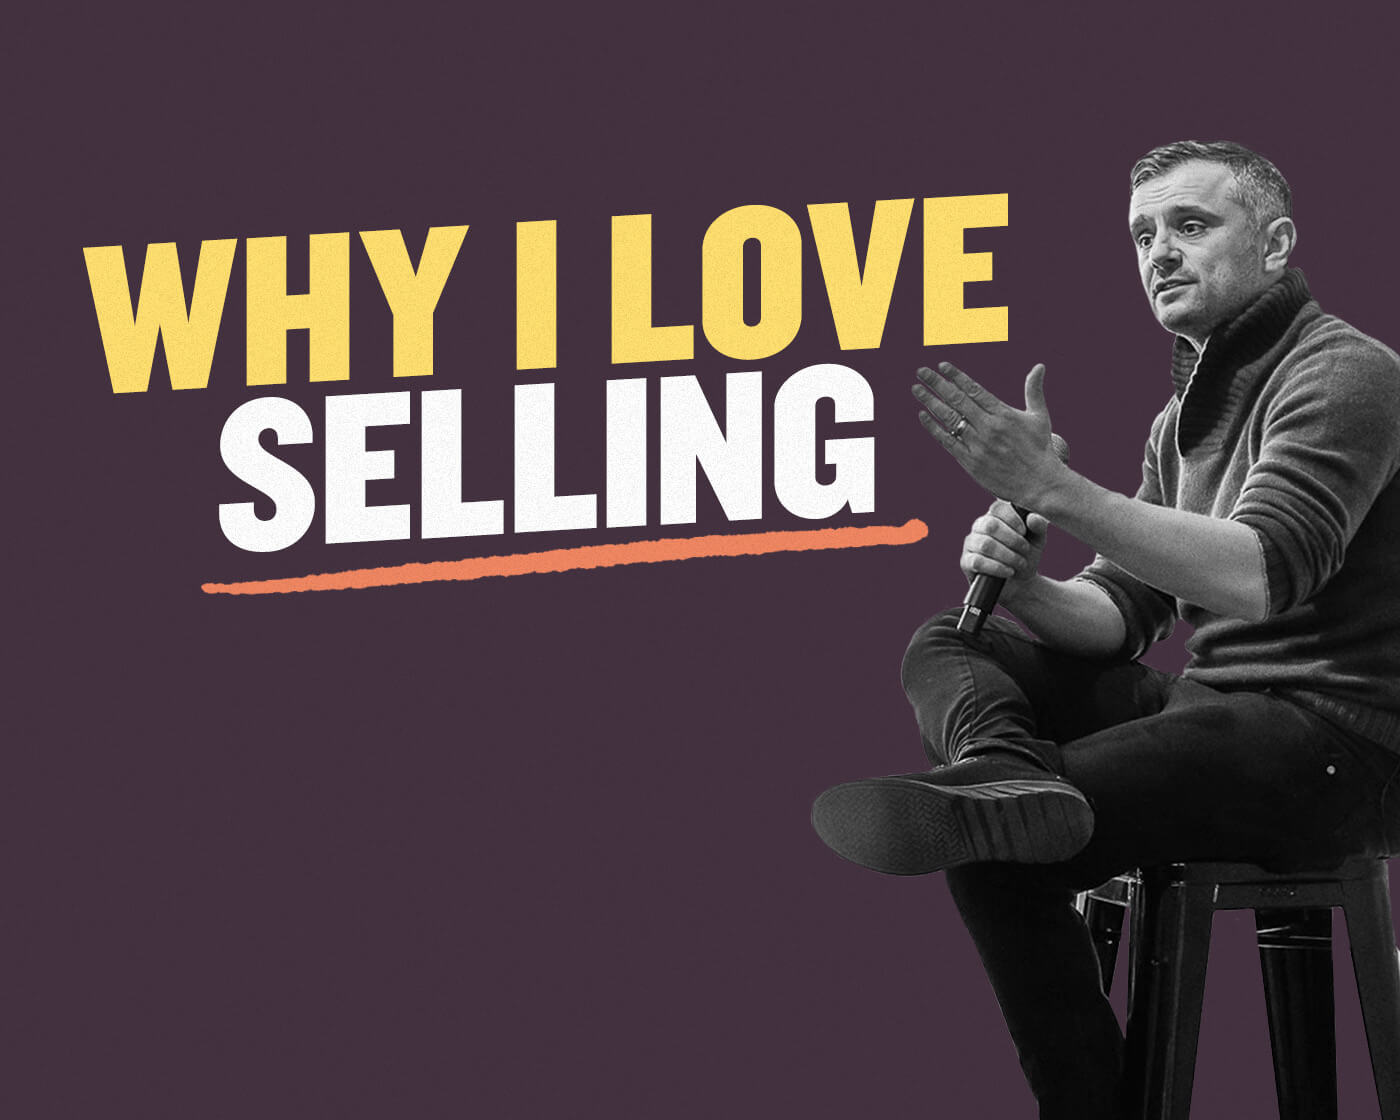 I Love Selling. Here’s Why.